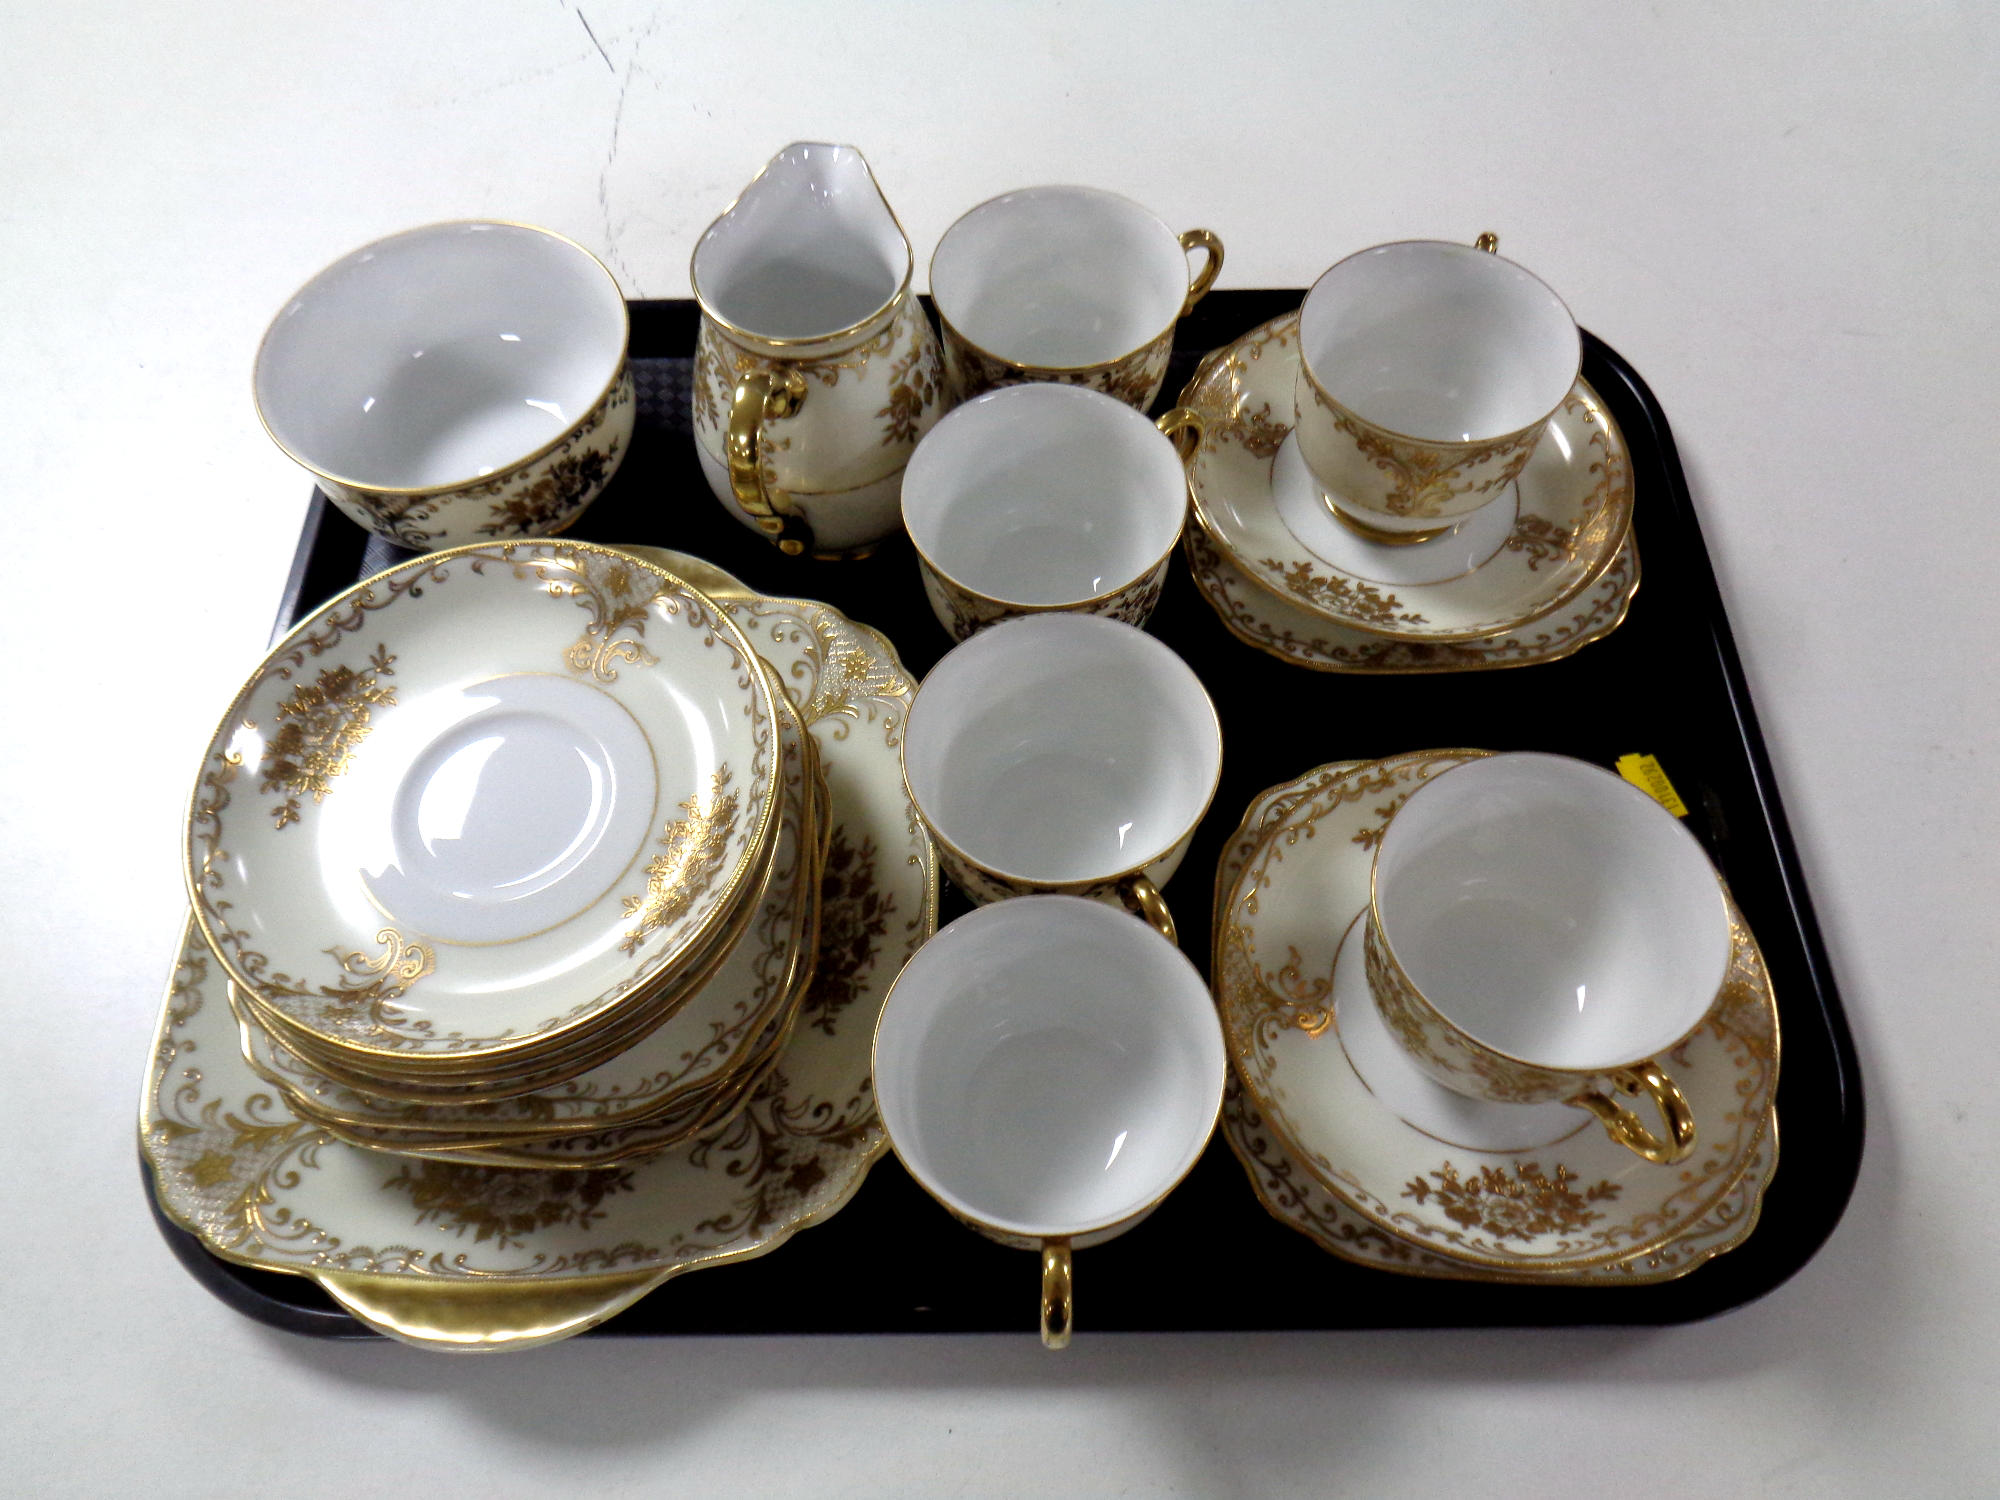 A tray containing twenty-one piece Meito hand painted china tea service.